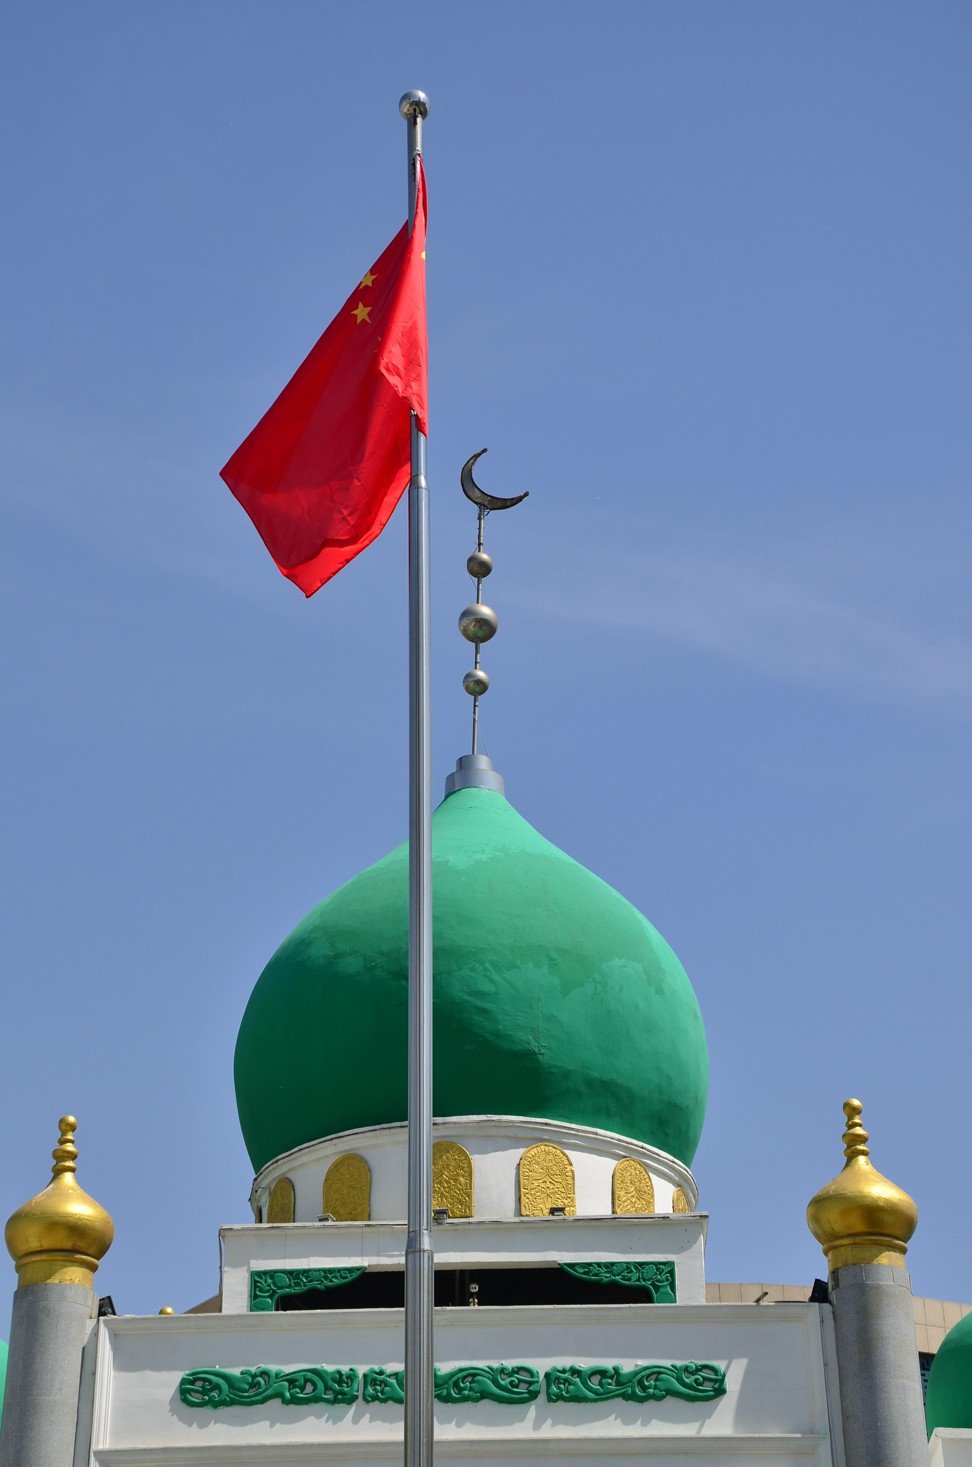 Chinese flags are an increasingly common sight at mosques across China. Photo: Nectar Gan